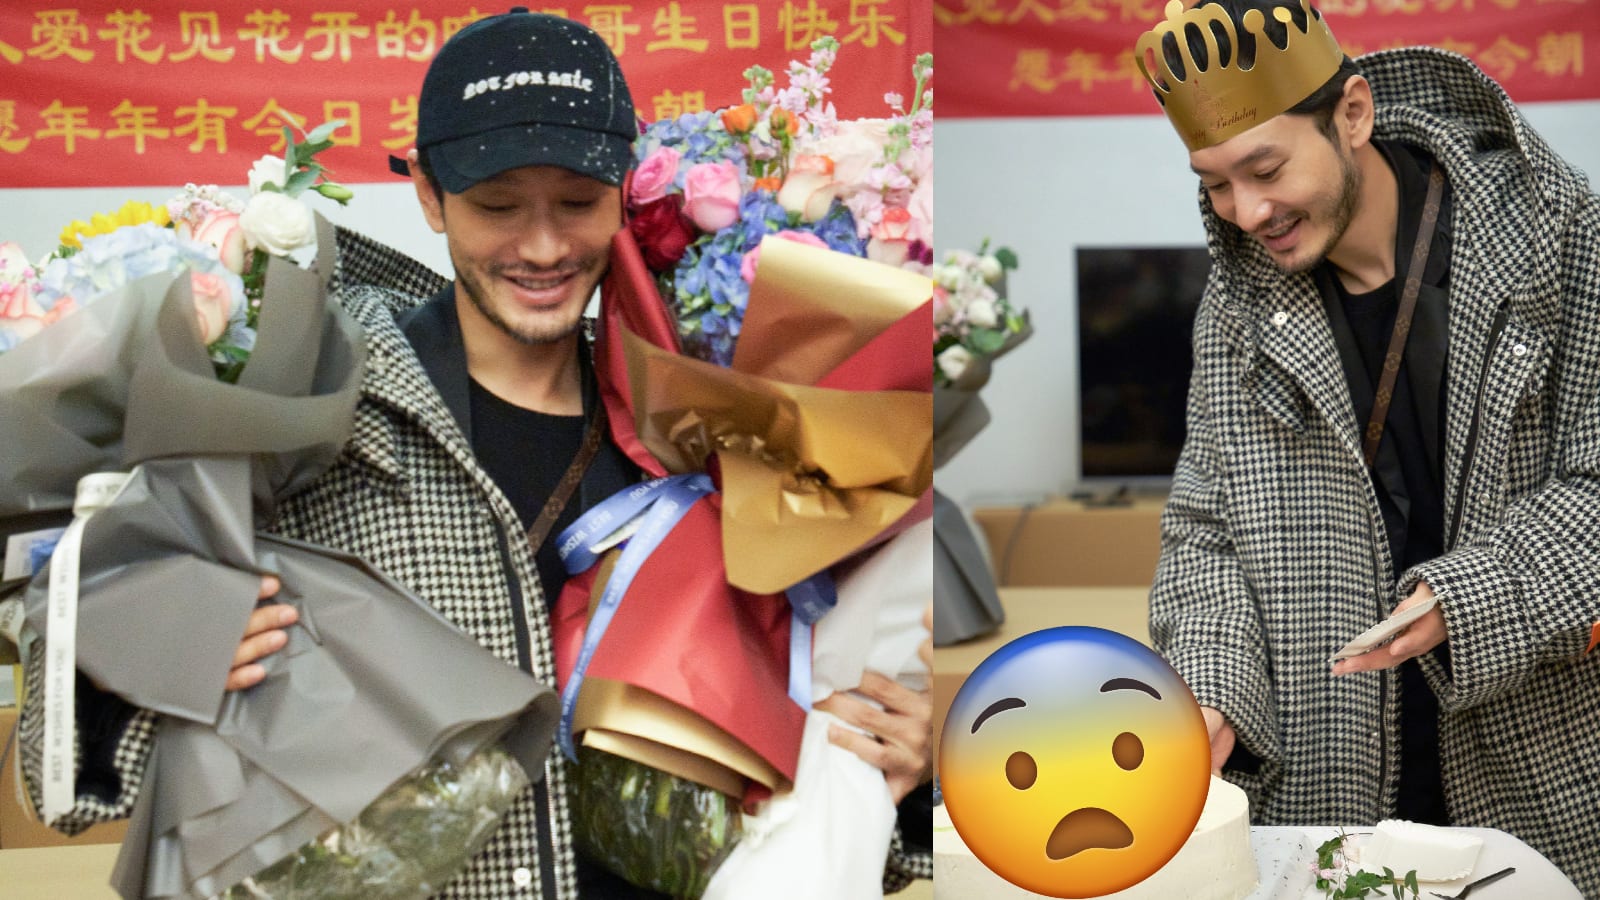 Huang Xiaoming Is On A Strict Diet, So He Got A Tofu Cake For His 43rd Birthday